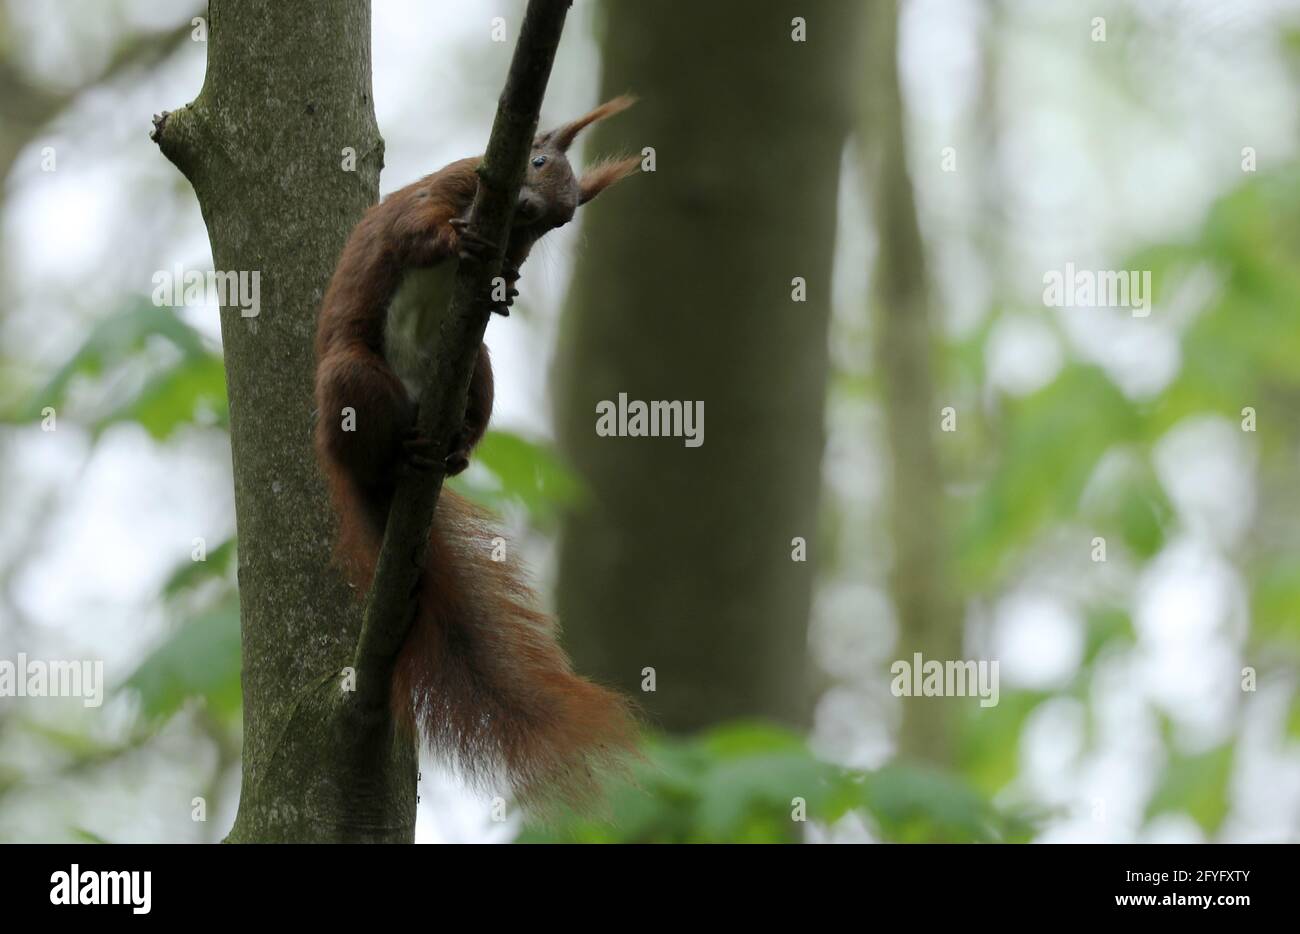 Squirrel is sitting in a tree in the forest Stock Photo